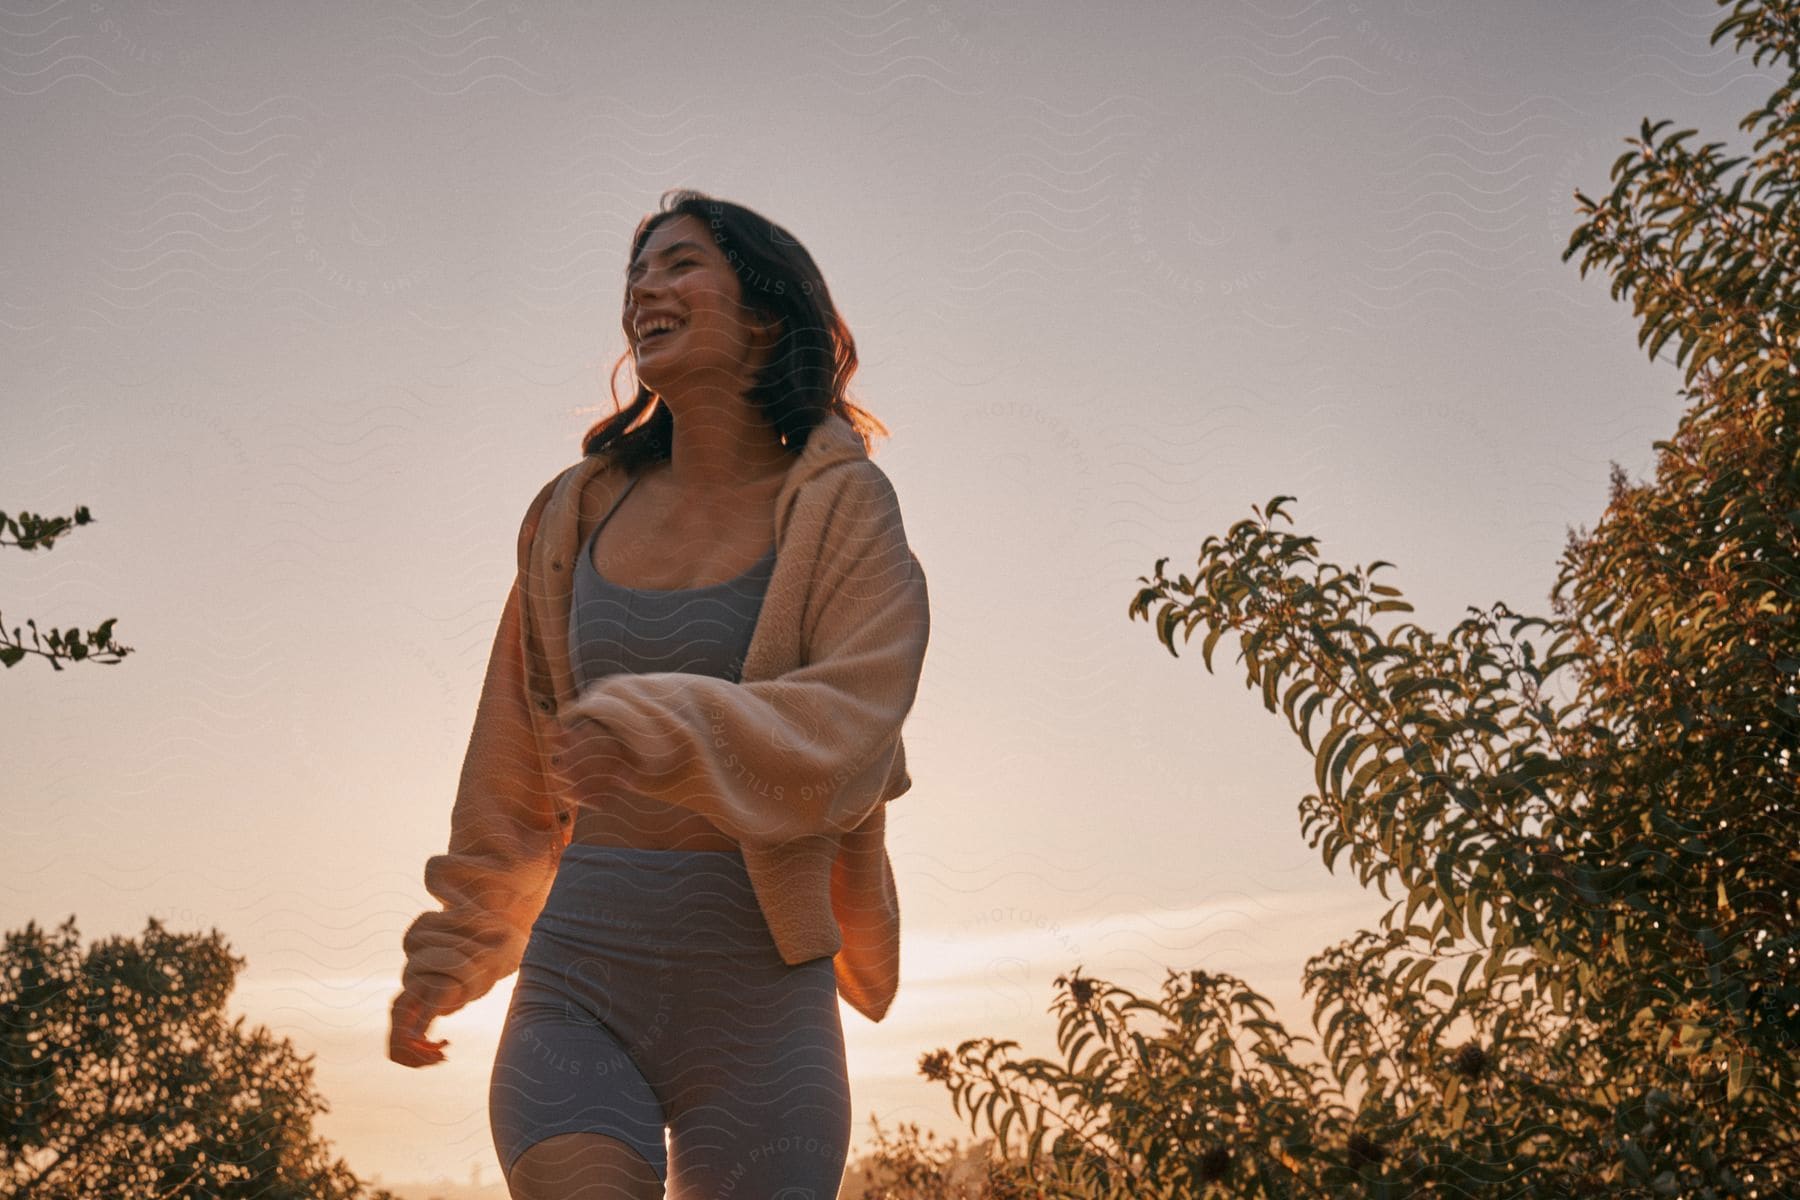 A woman laughing while running in nature at sunset.